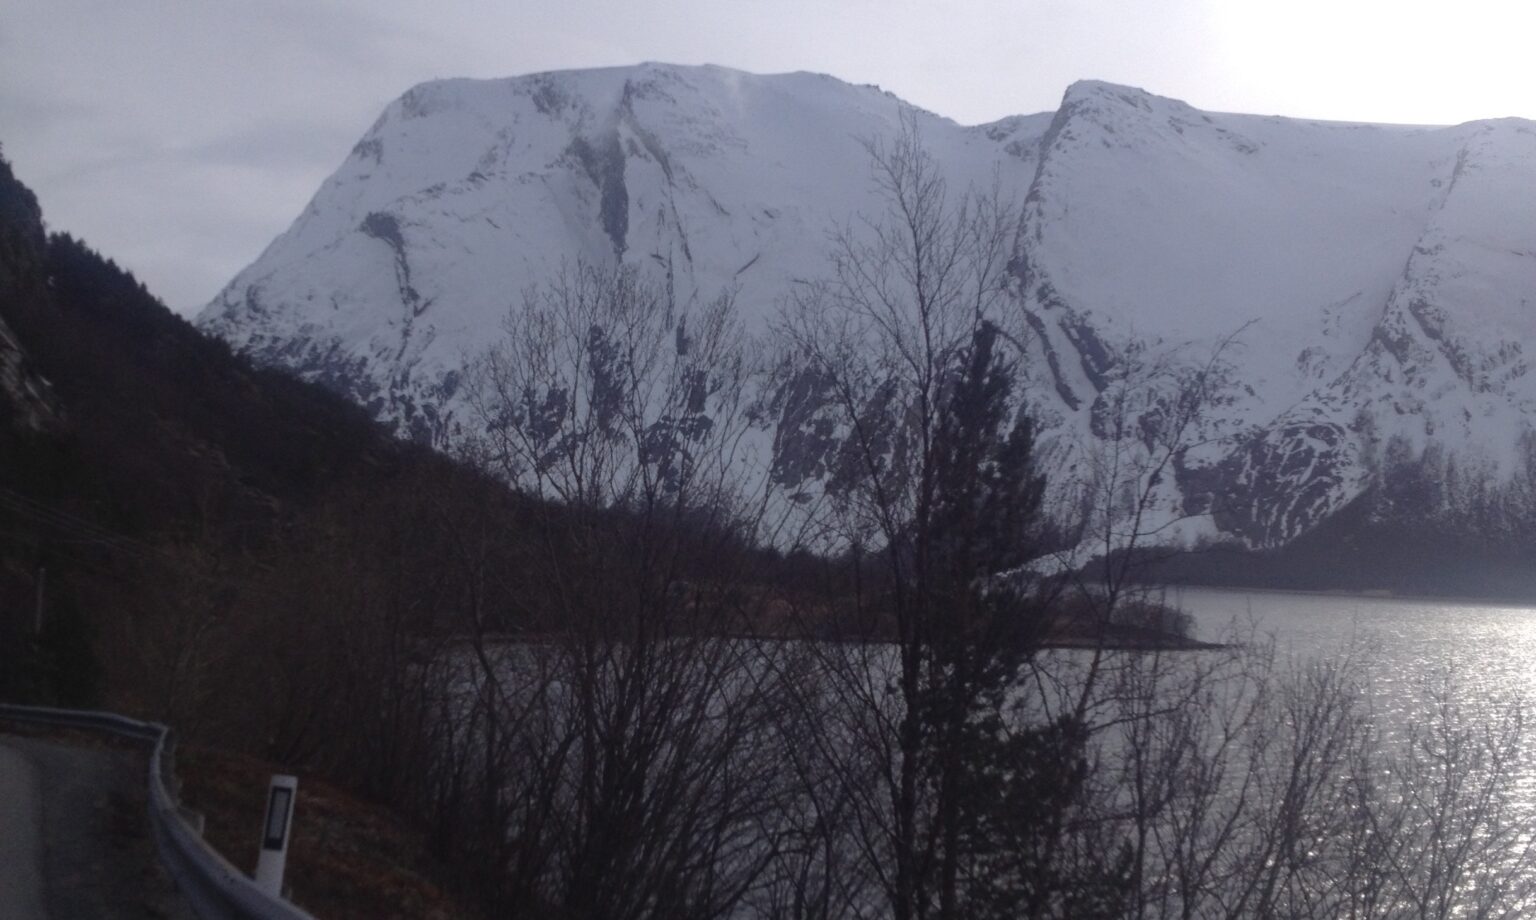 Driving up the Skjomen Fjord and looking at the potential ski terrain